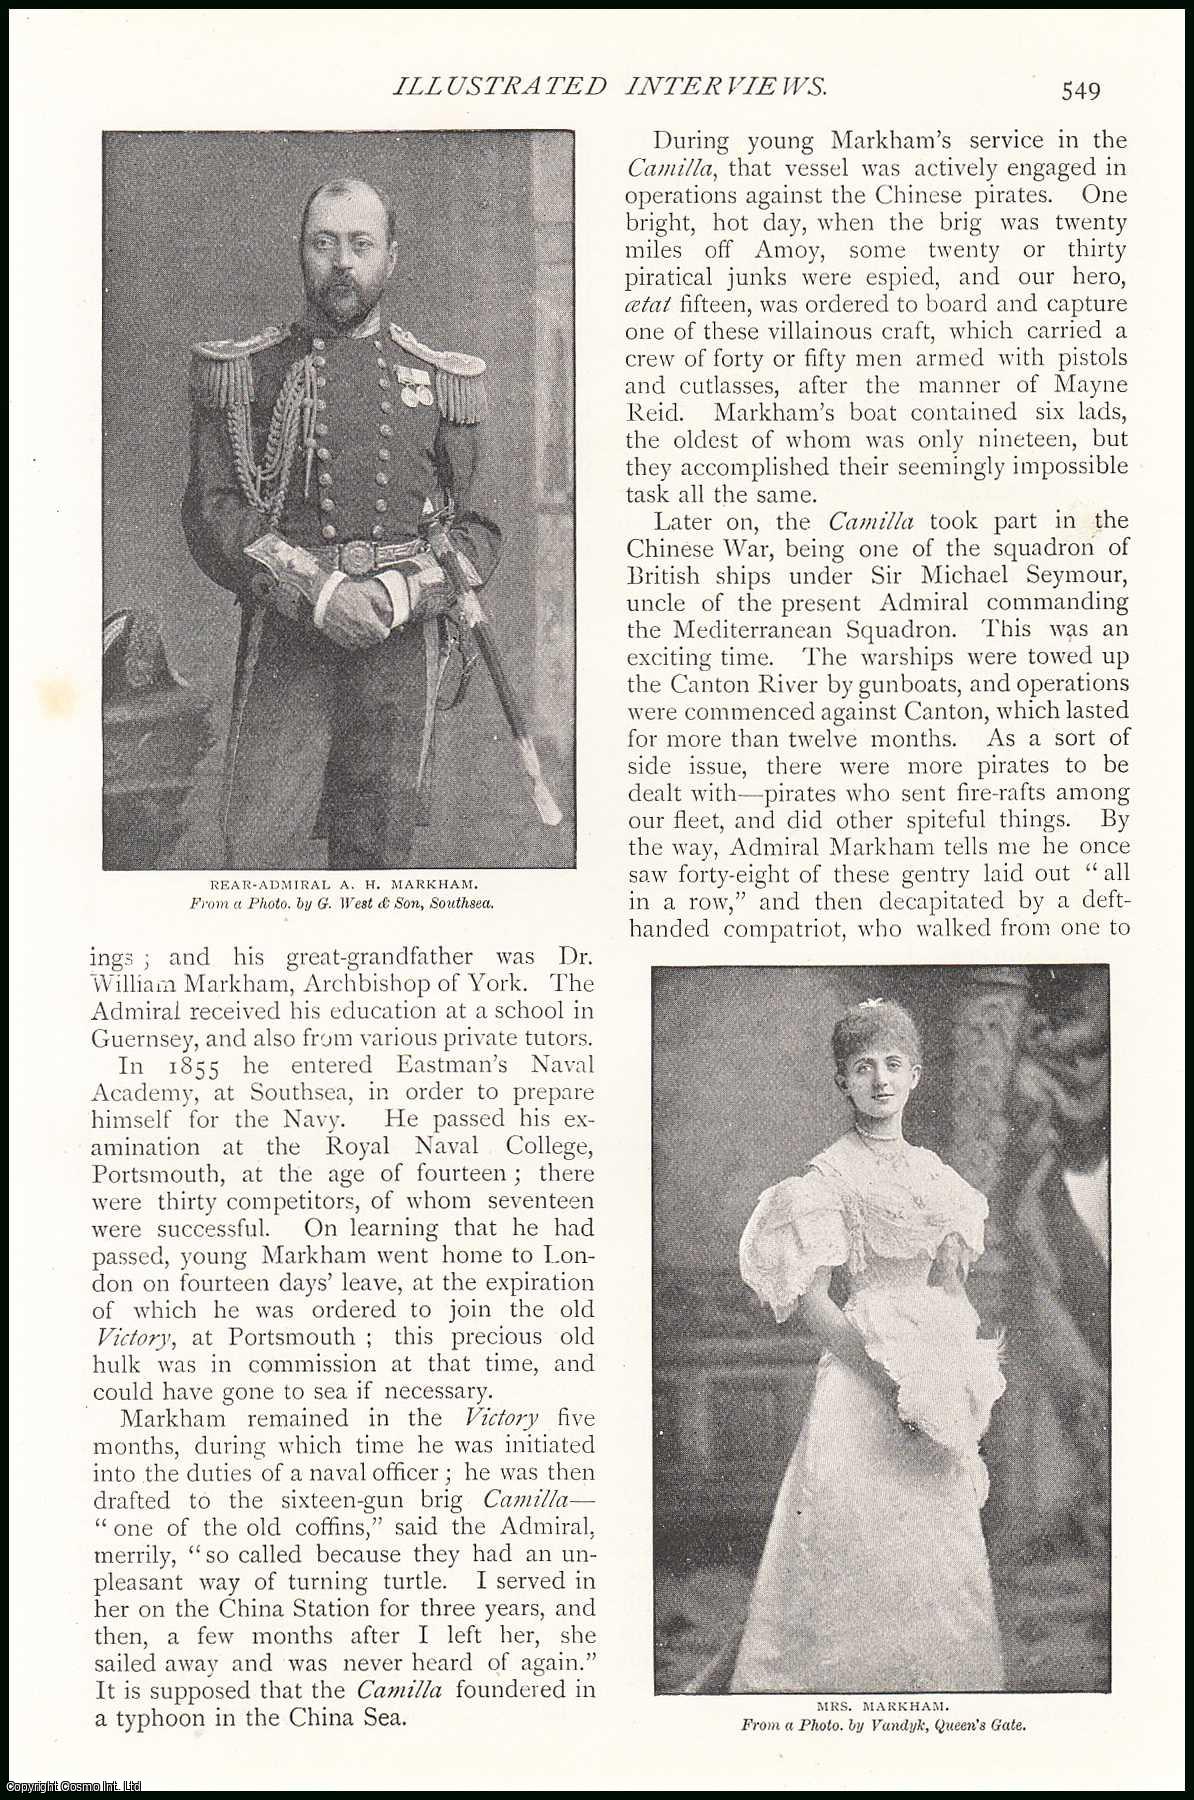 William G. Fitzgerald - Rear-Admiral A.H. Markham, R.N., F.R.G.S. Illustrated Interview. An uncommon original article from The Strand Magazine, 1895.